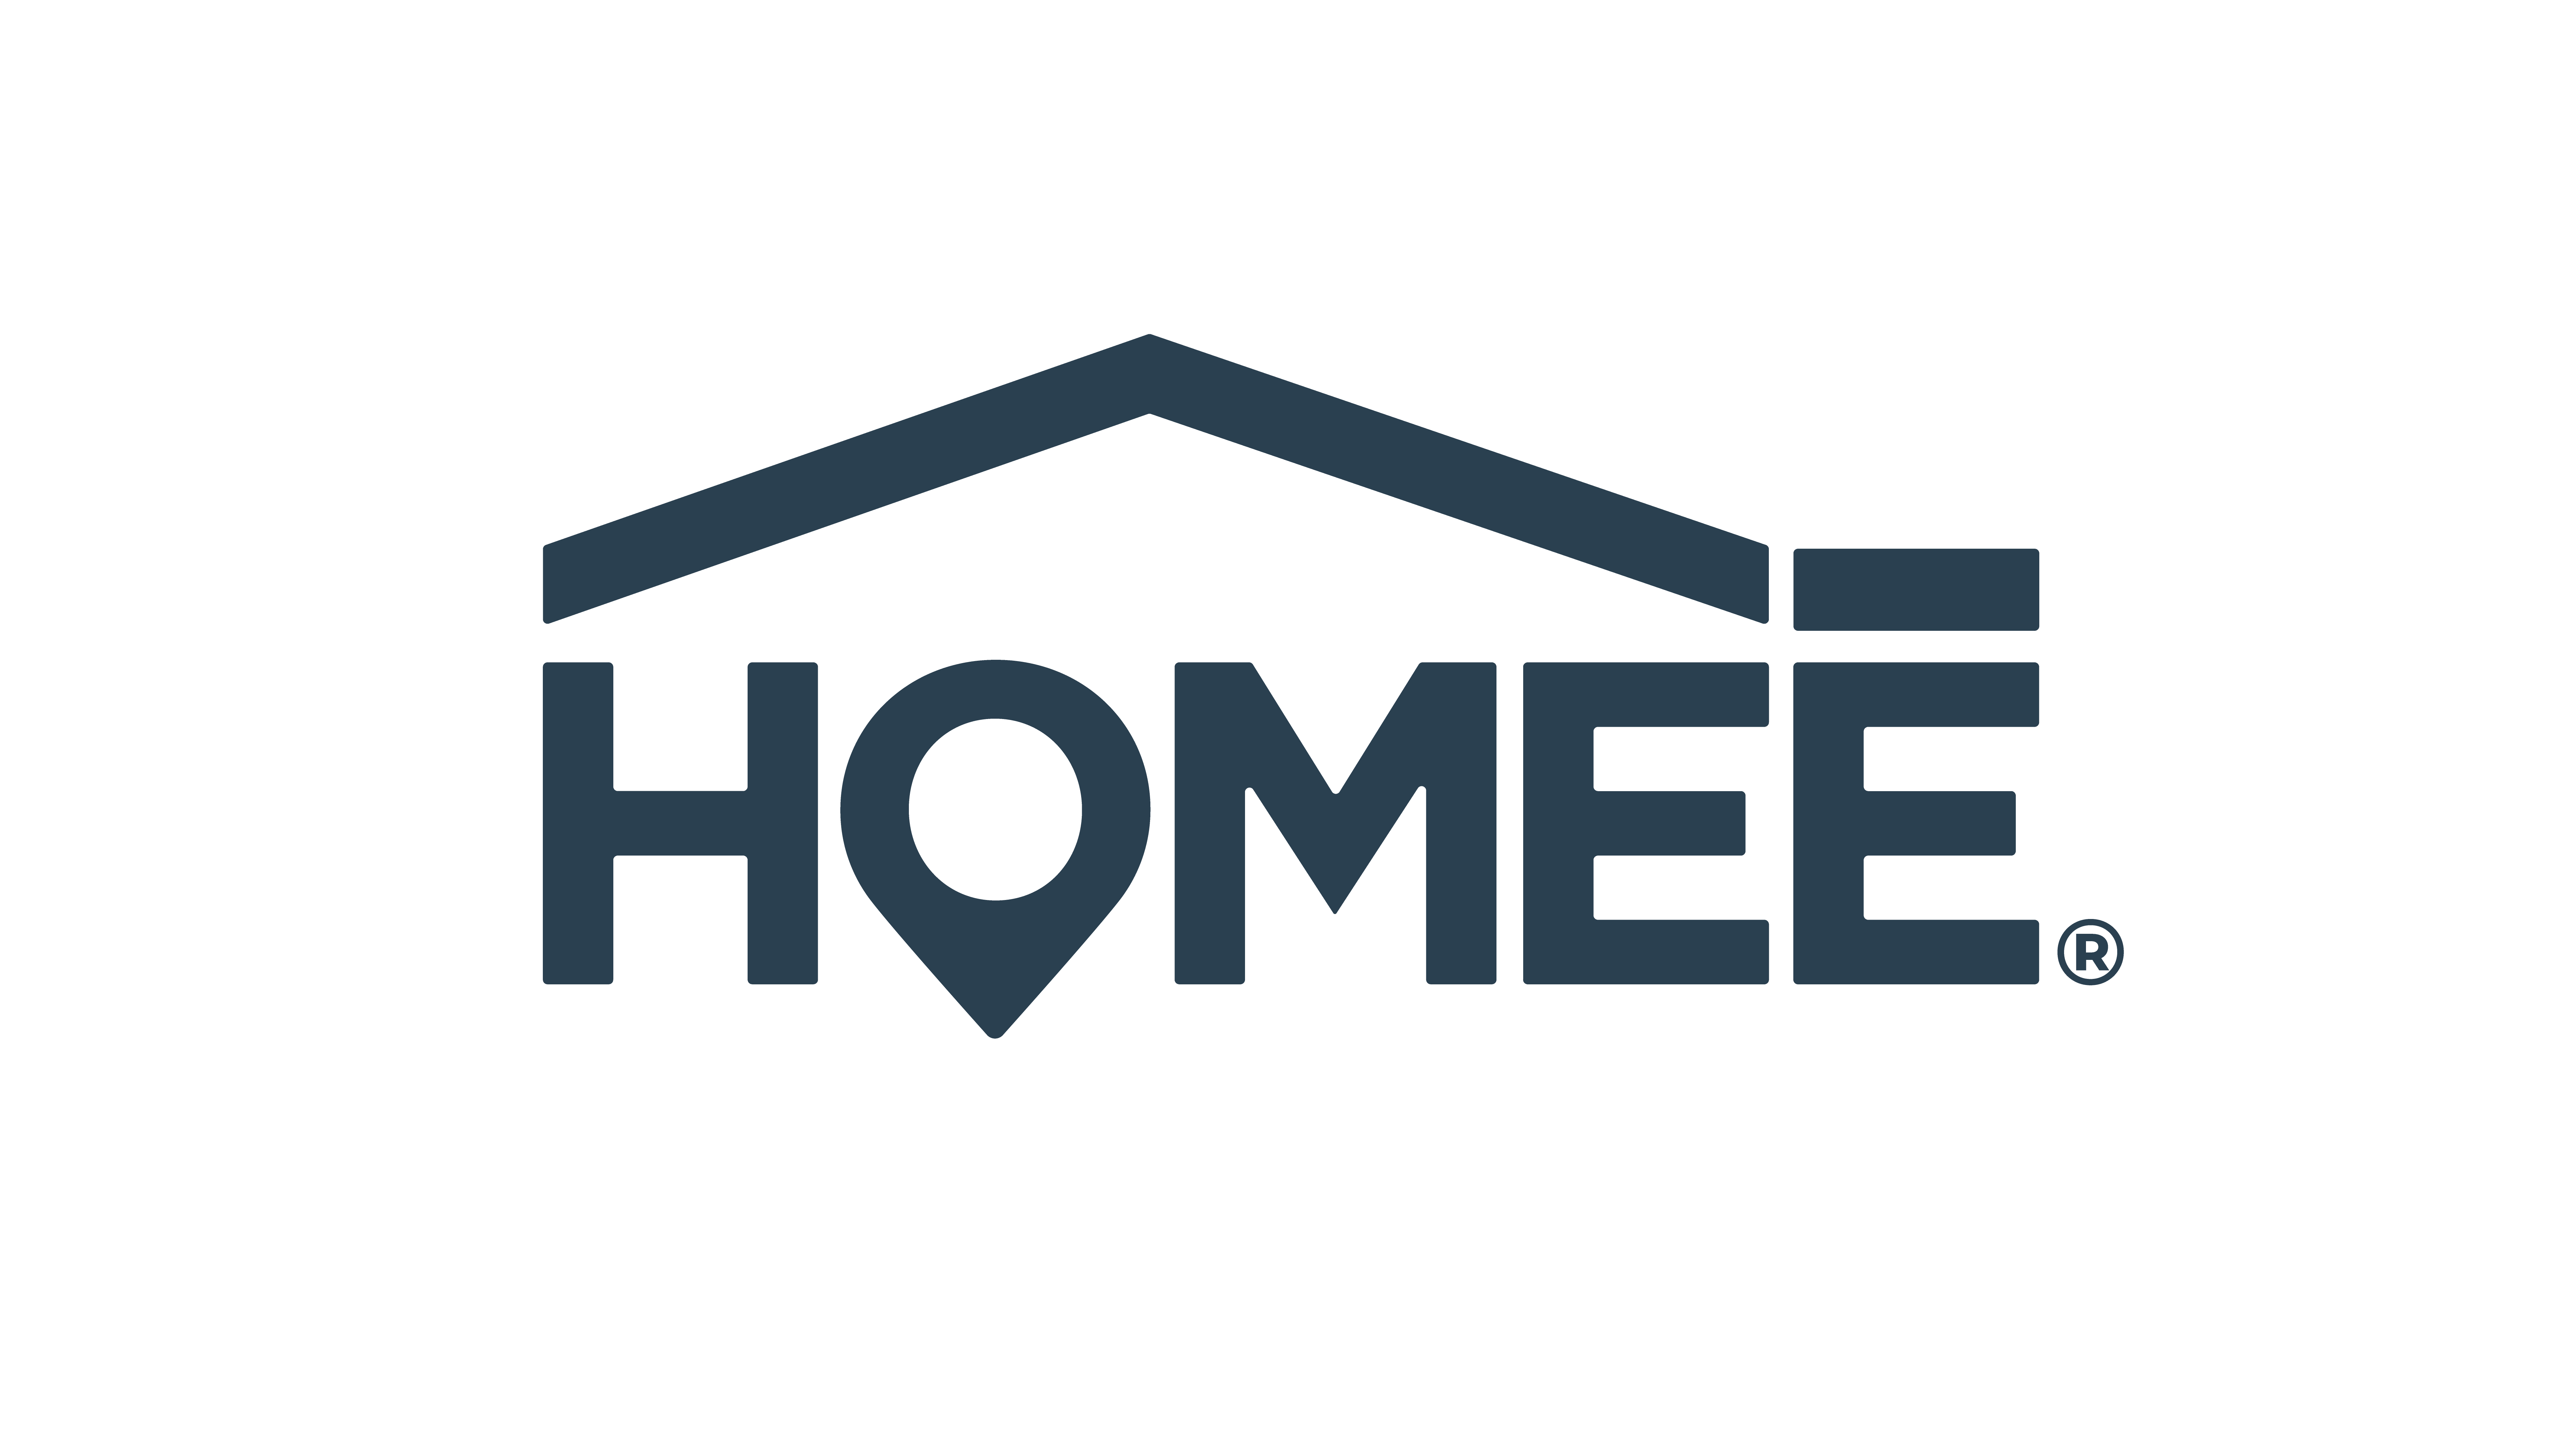 HOMEE Works with Charity in the Tampa Bay Area